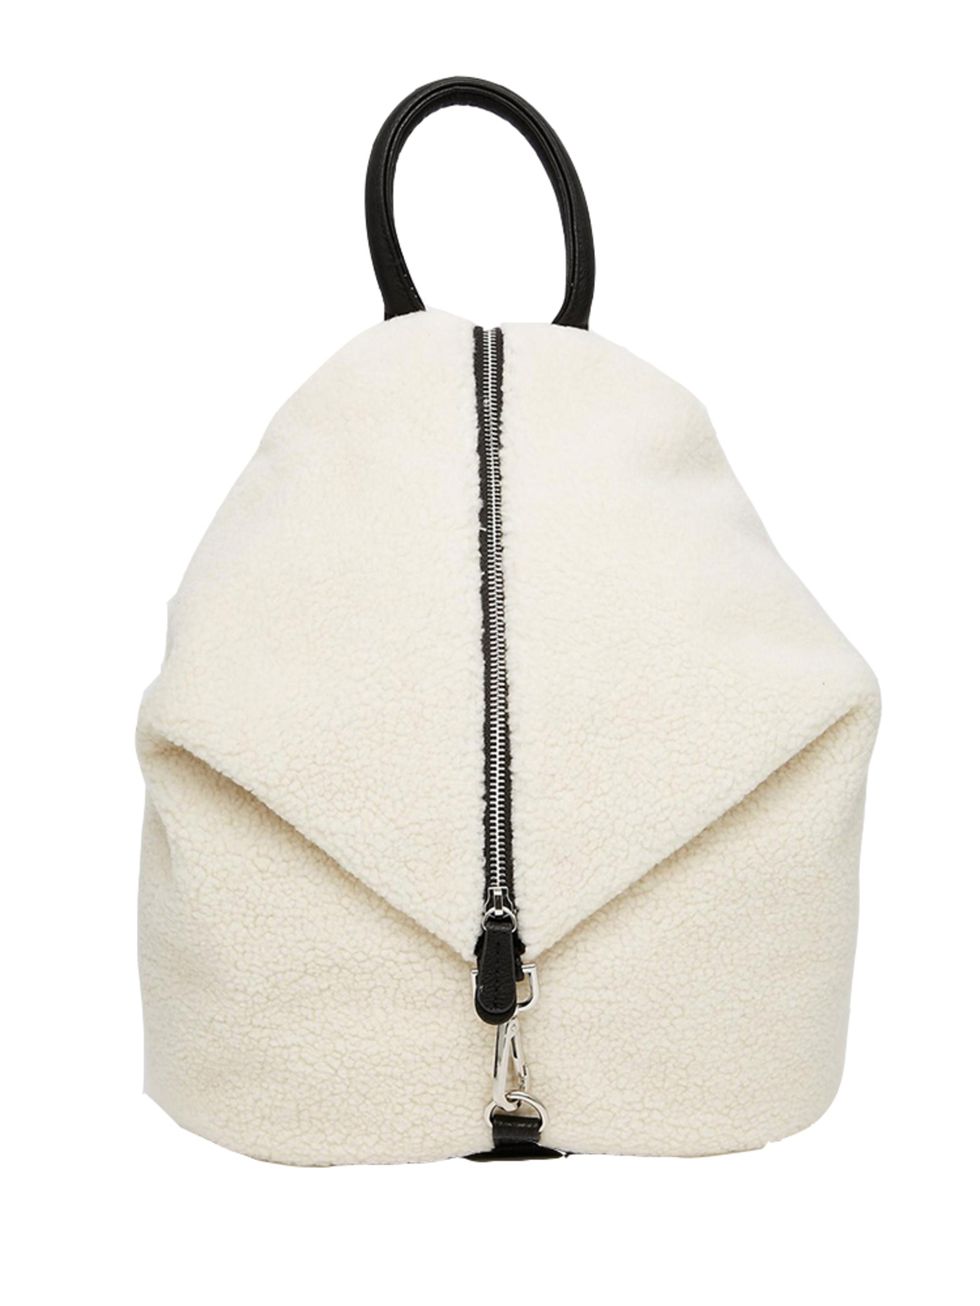 <p>Shearling is everywhere this season; this back-pack is not only practical but a textured accessory will add interest to any outfit.</p>

<p> </p>

<p><a href="http://www.asos.com/ASOS/ASOS-Front-Zip-Backpack-With-Dog-Clip-In-Faux-Shearling/Prod/pgeprod